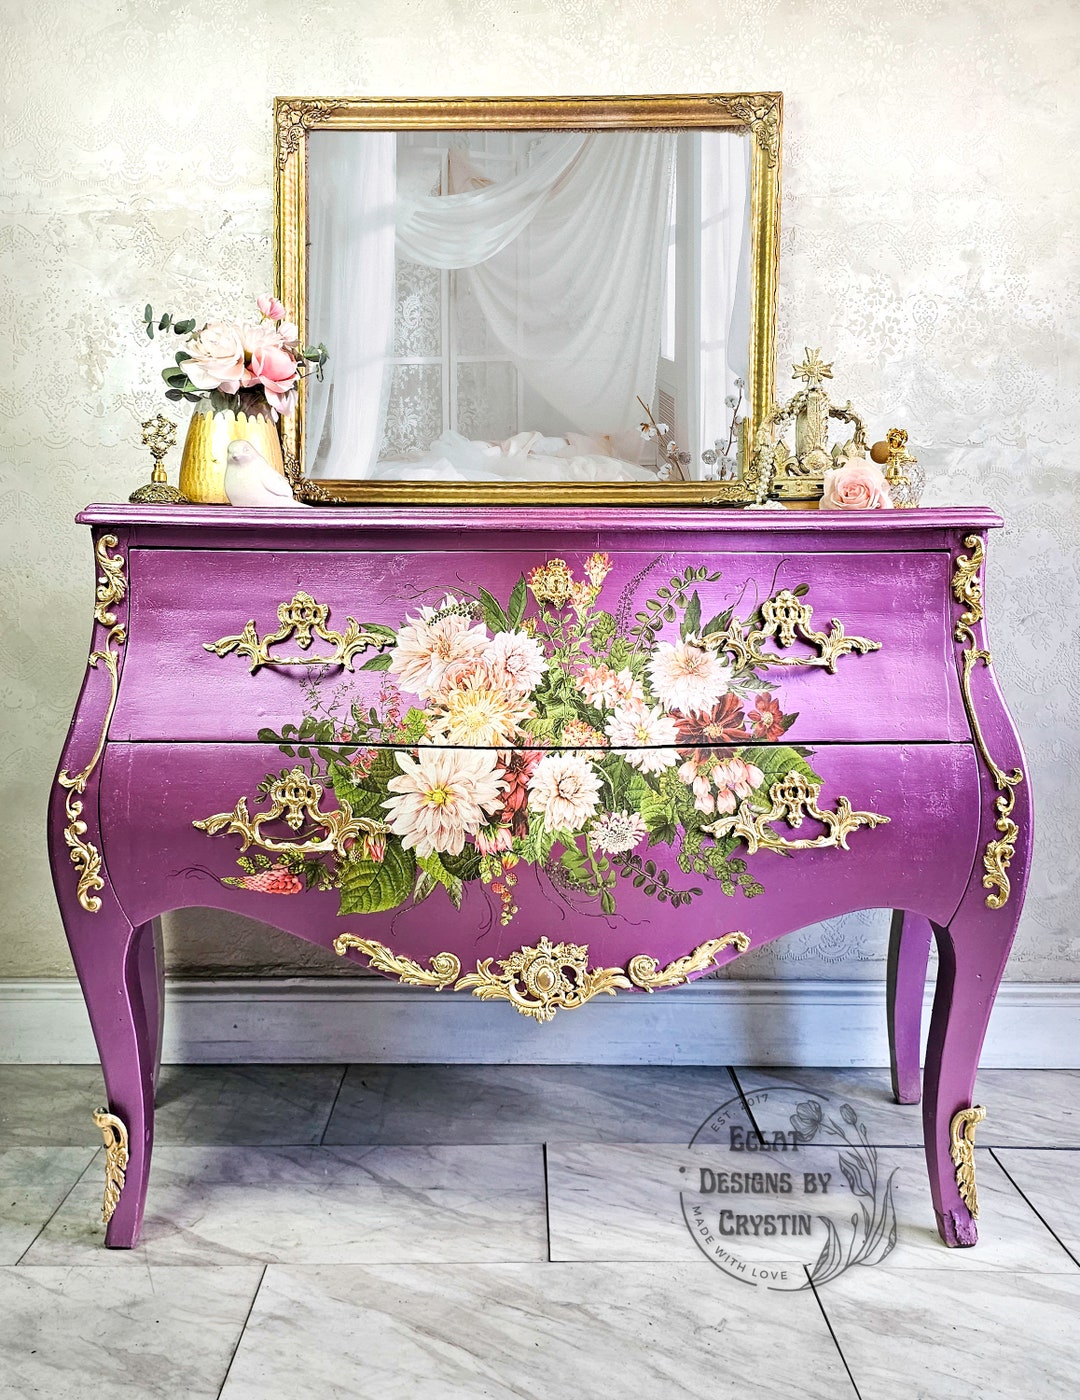 Purple Chest of Drawers - Eclat Designs by Crystin